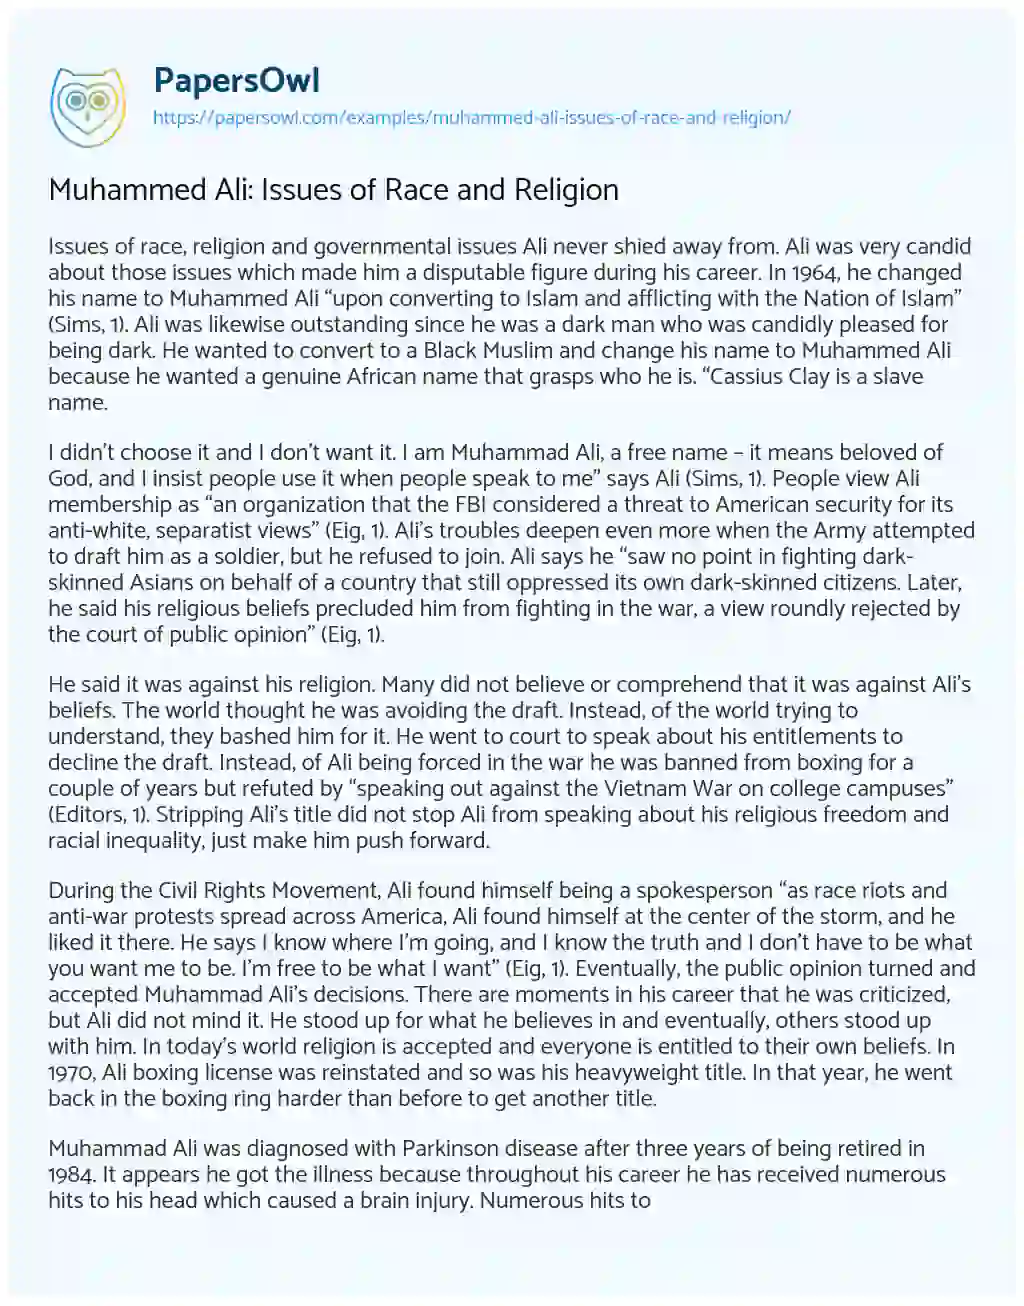 Essay on Muhammed Ali: Issues of Race and Religion